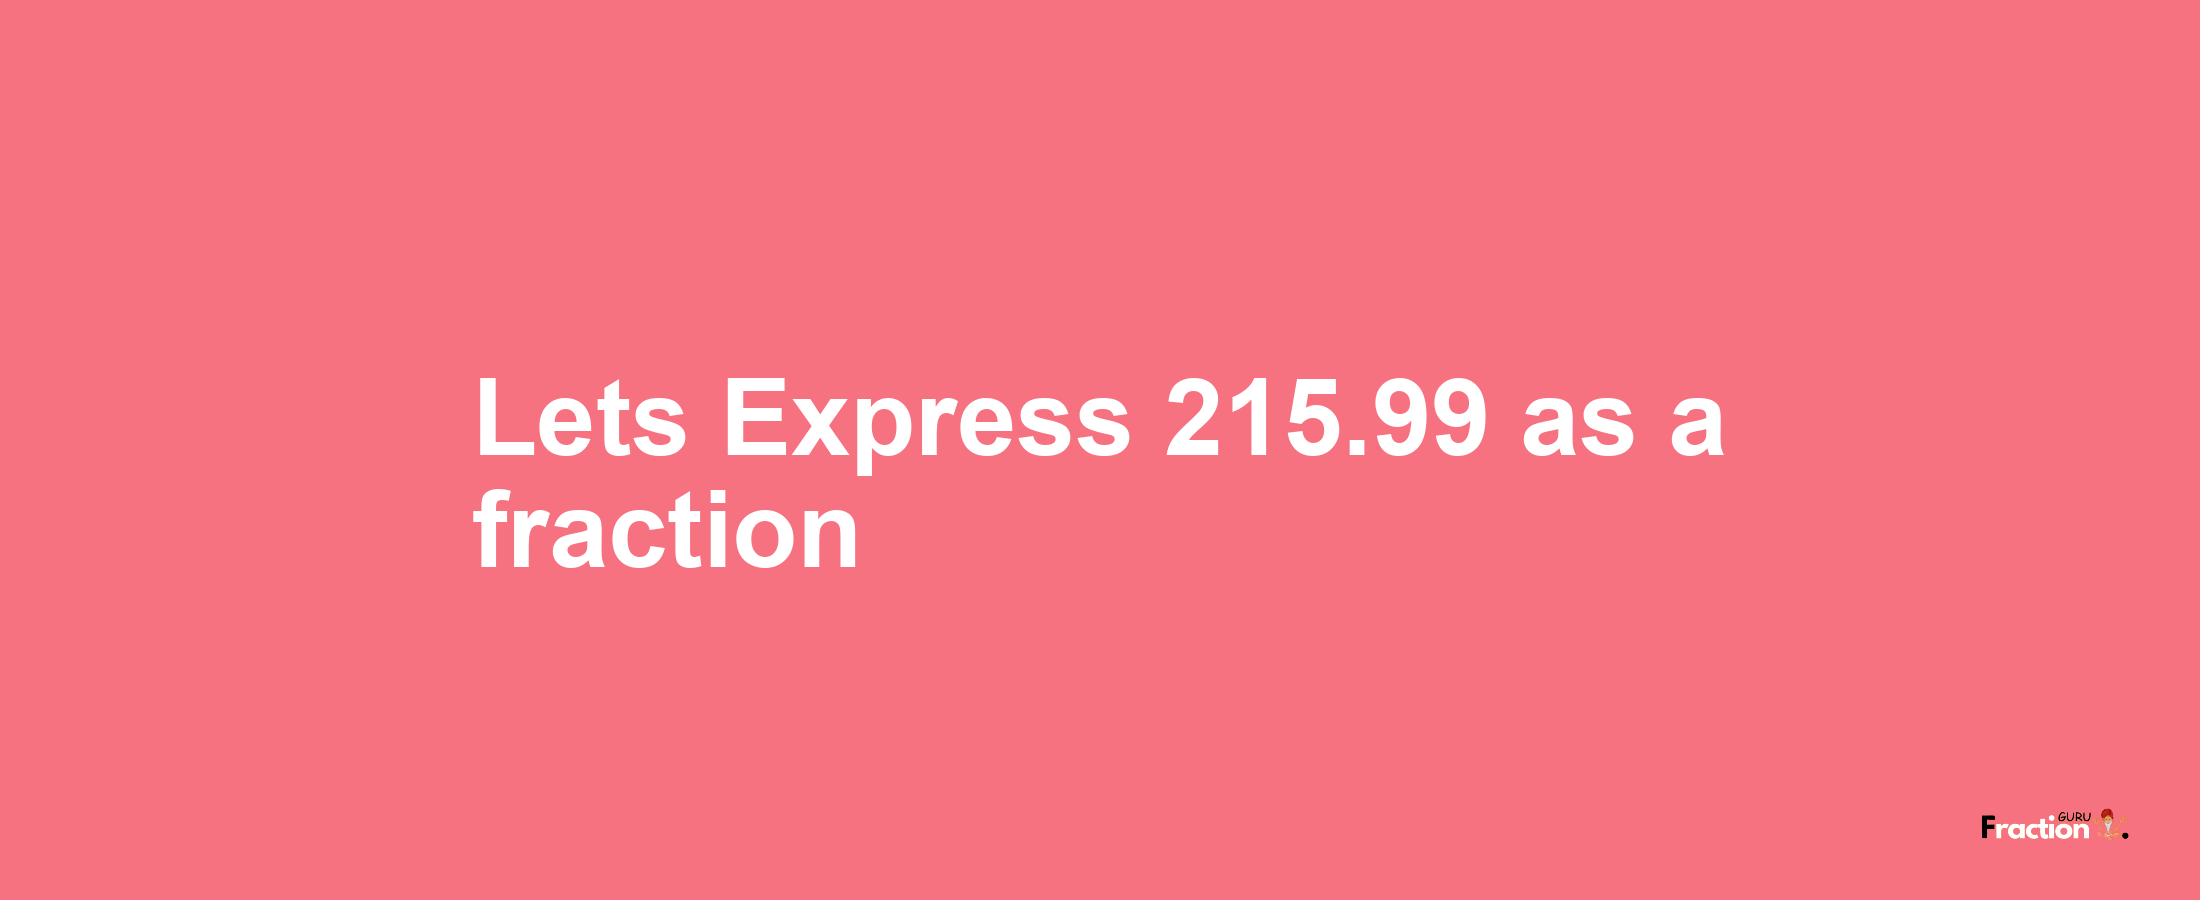 Lets Express 215.99 as afraction